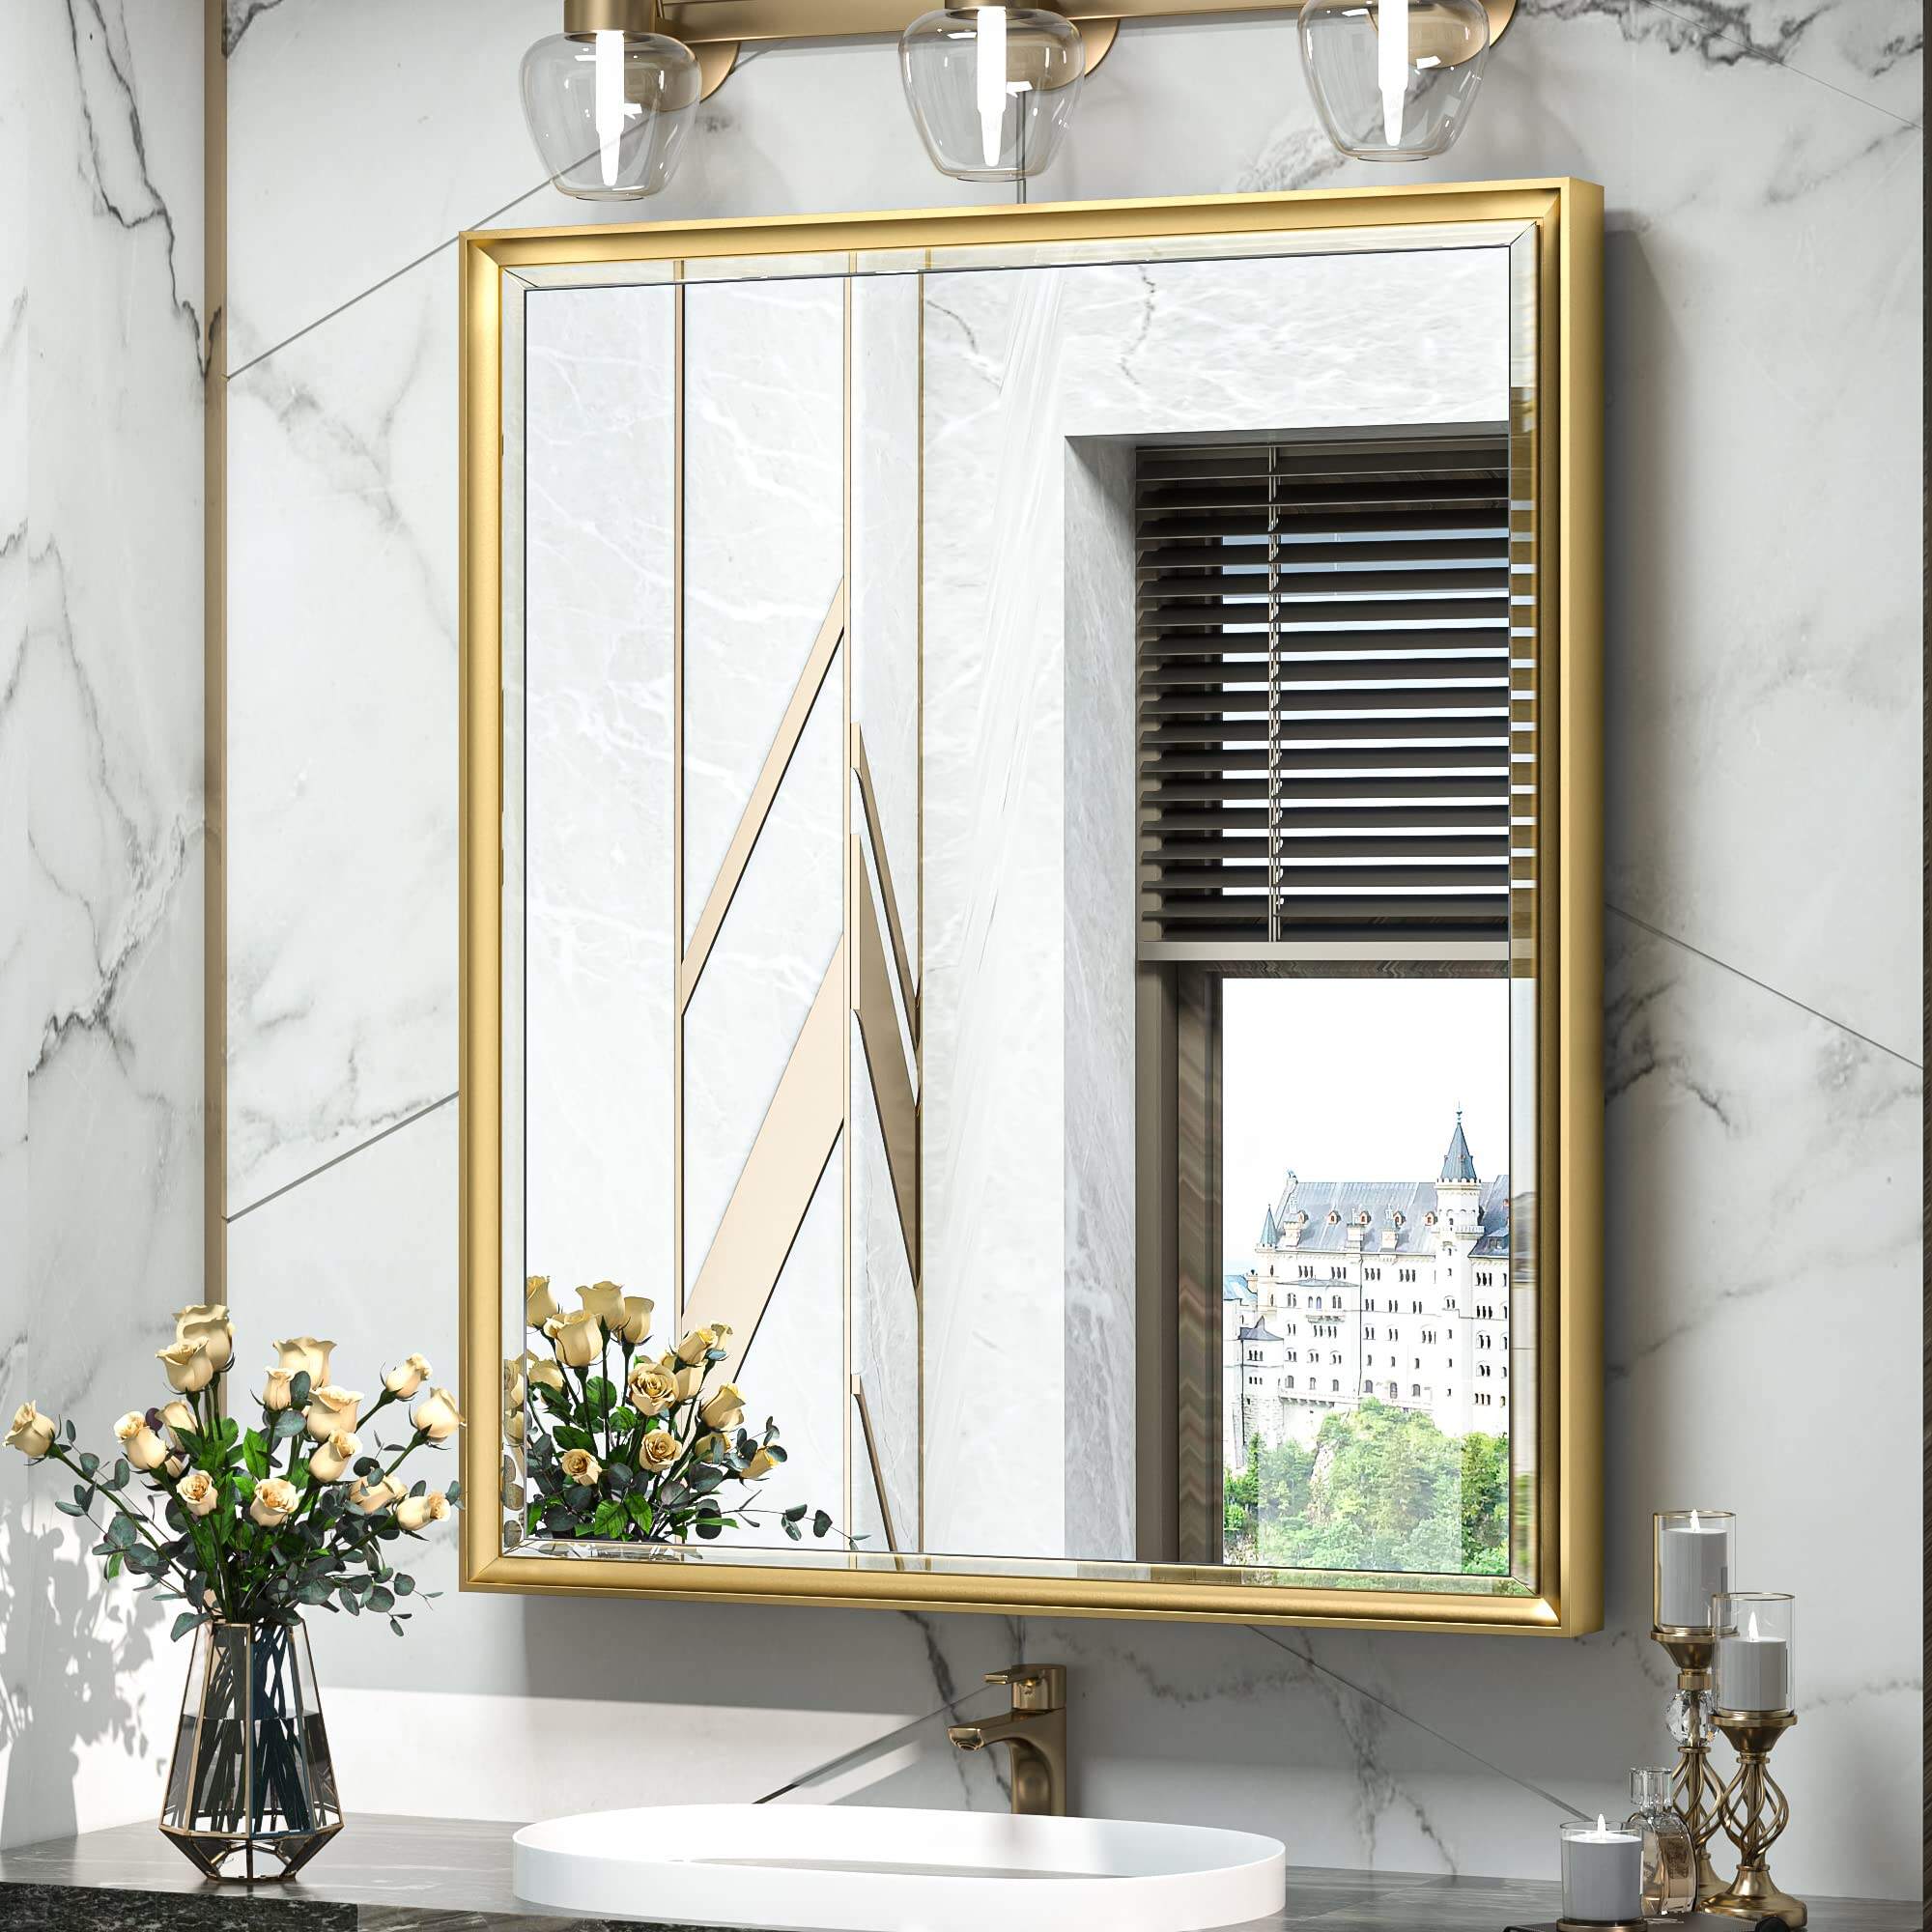 Foshan Haohan Smart Home Co., Ltd.Medicine Cabinet 26x30 Bathroom Vanity Mirror Gold Metal Framed Recessed or Surface Wall Mounted with Aluminum Alloy Beveled Edges Design 1 Door for Modern Farmhouse